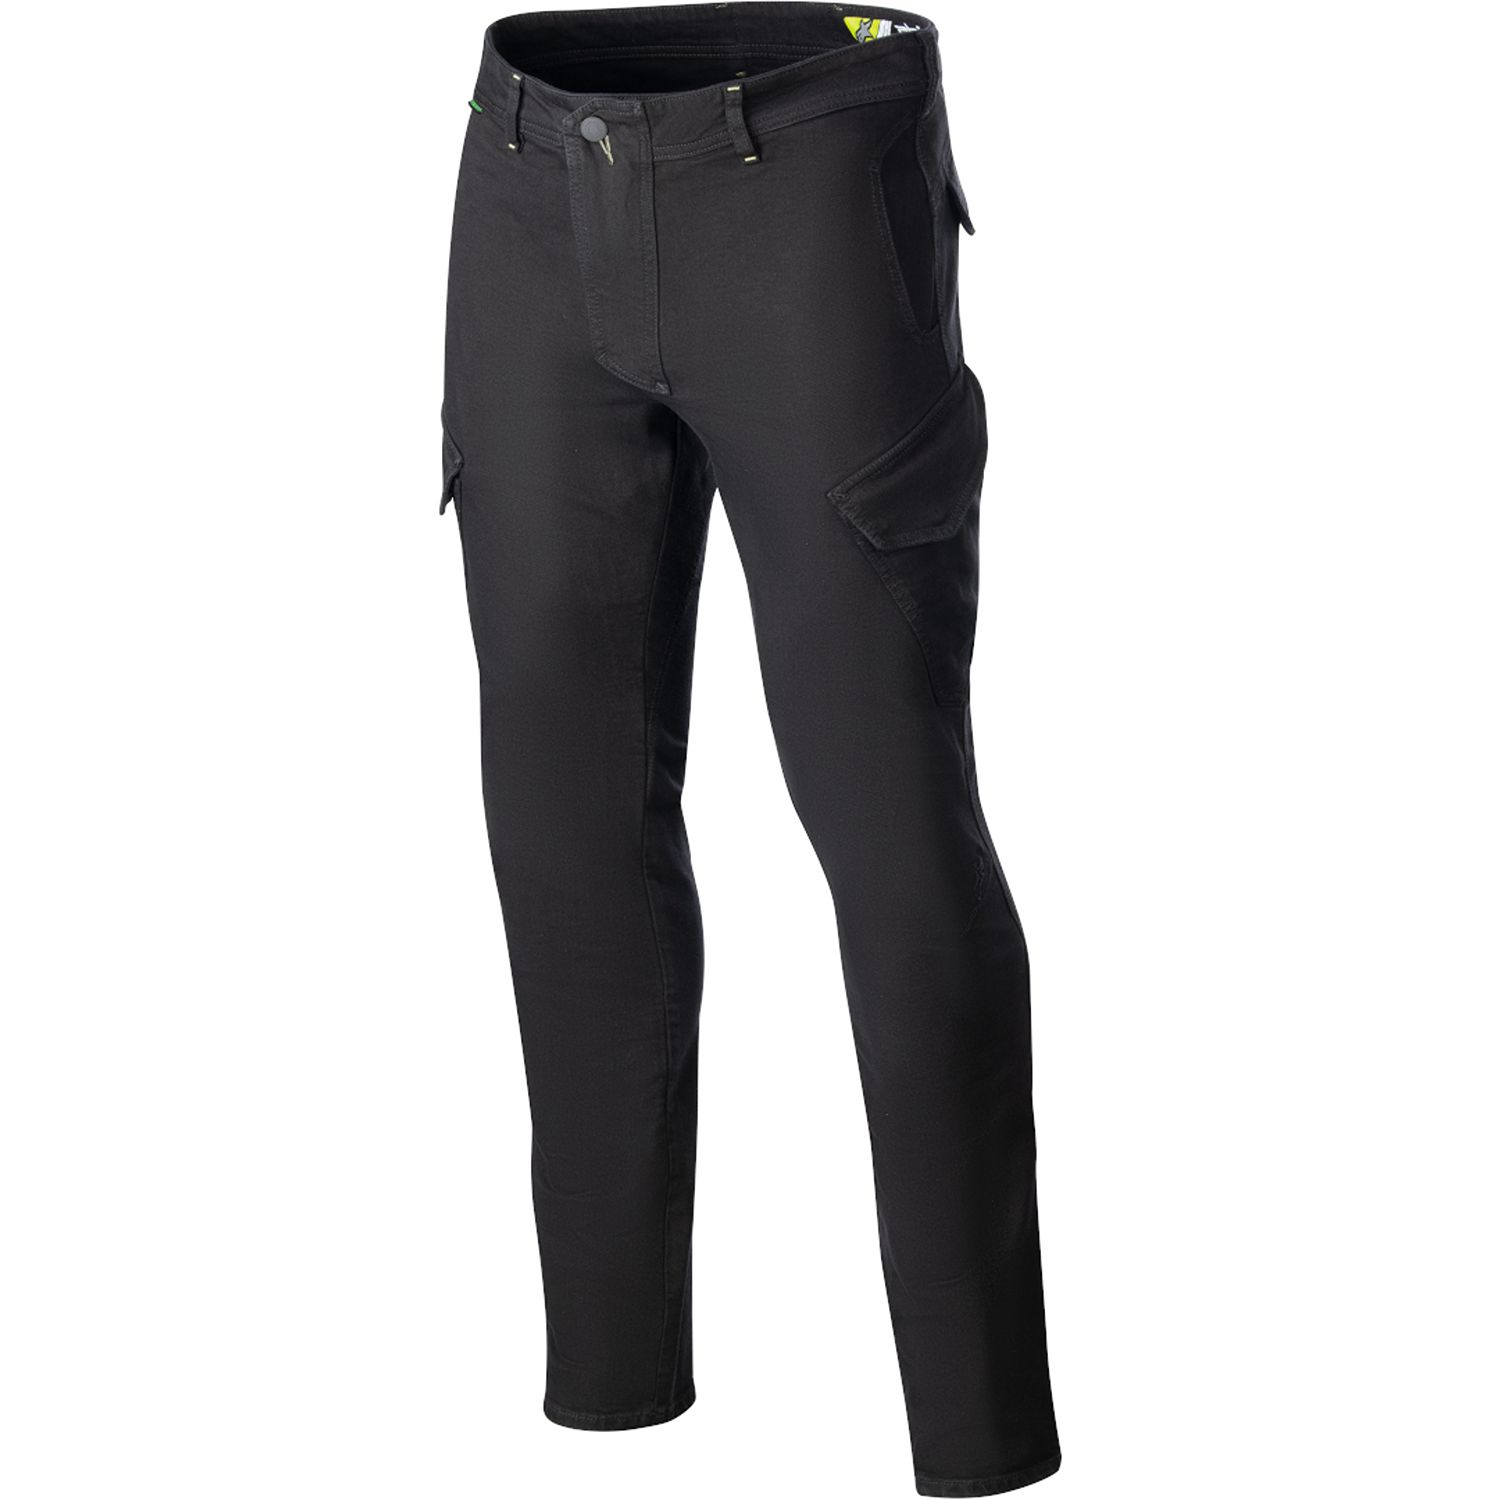 Image of Alpinestars Caliber Slim Fit Tech Riding Pants Anthracite Taille 34